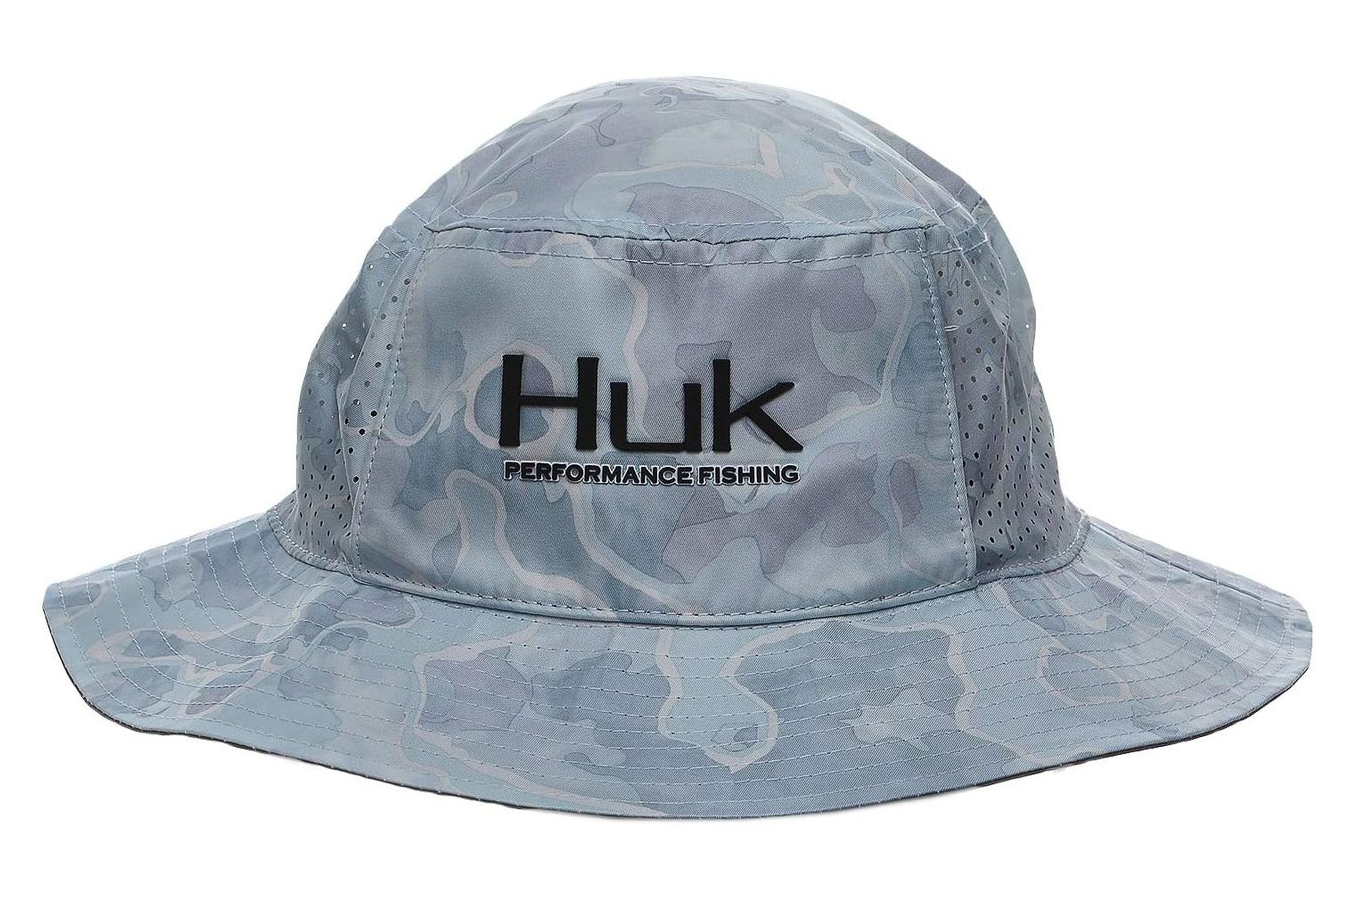 huk camo bucket hat for Sale,Up To OFF69%